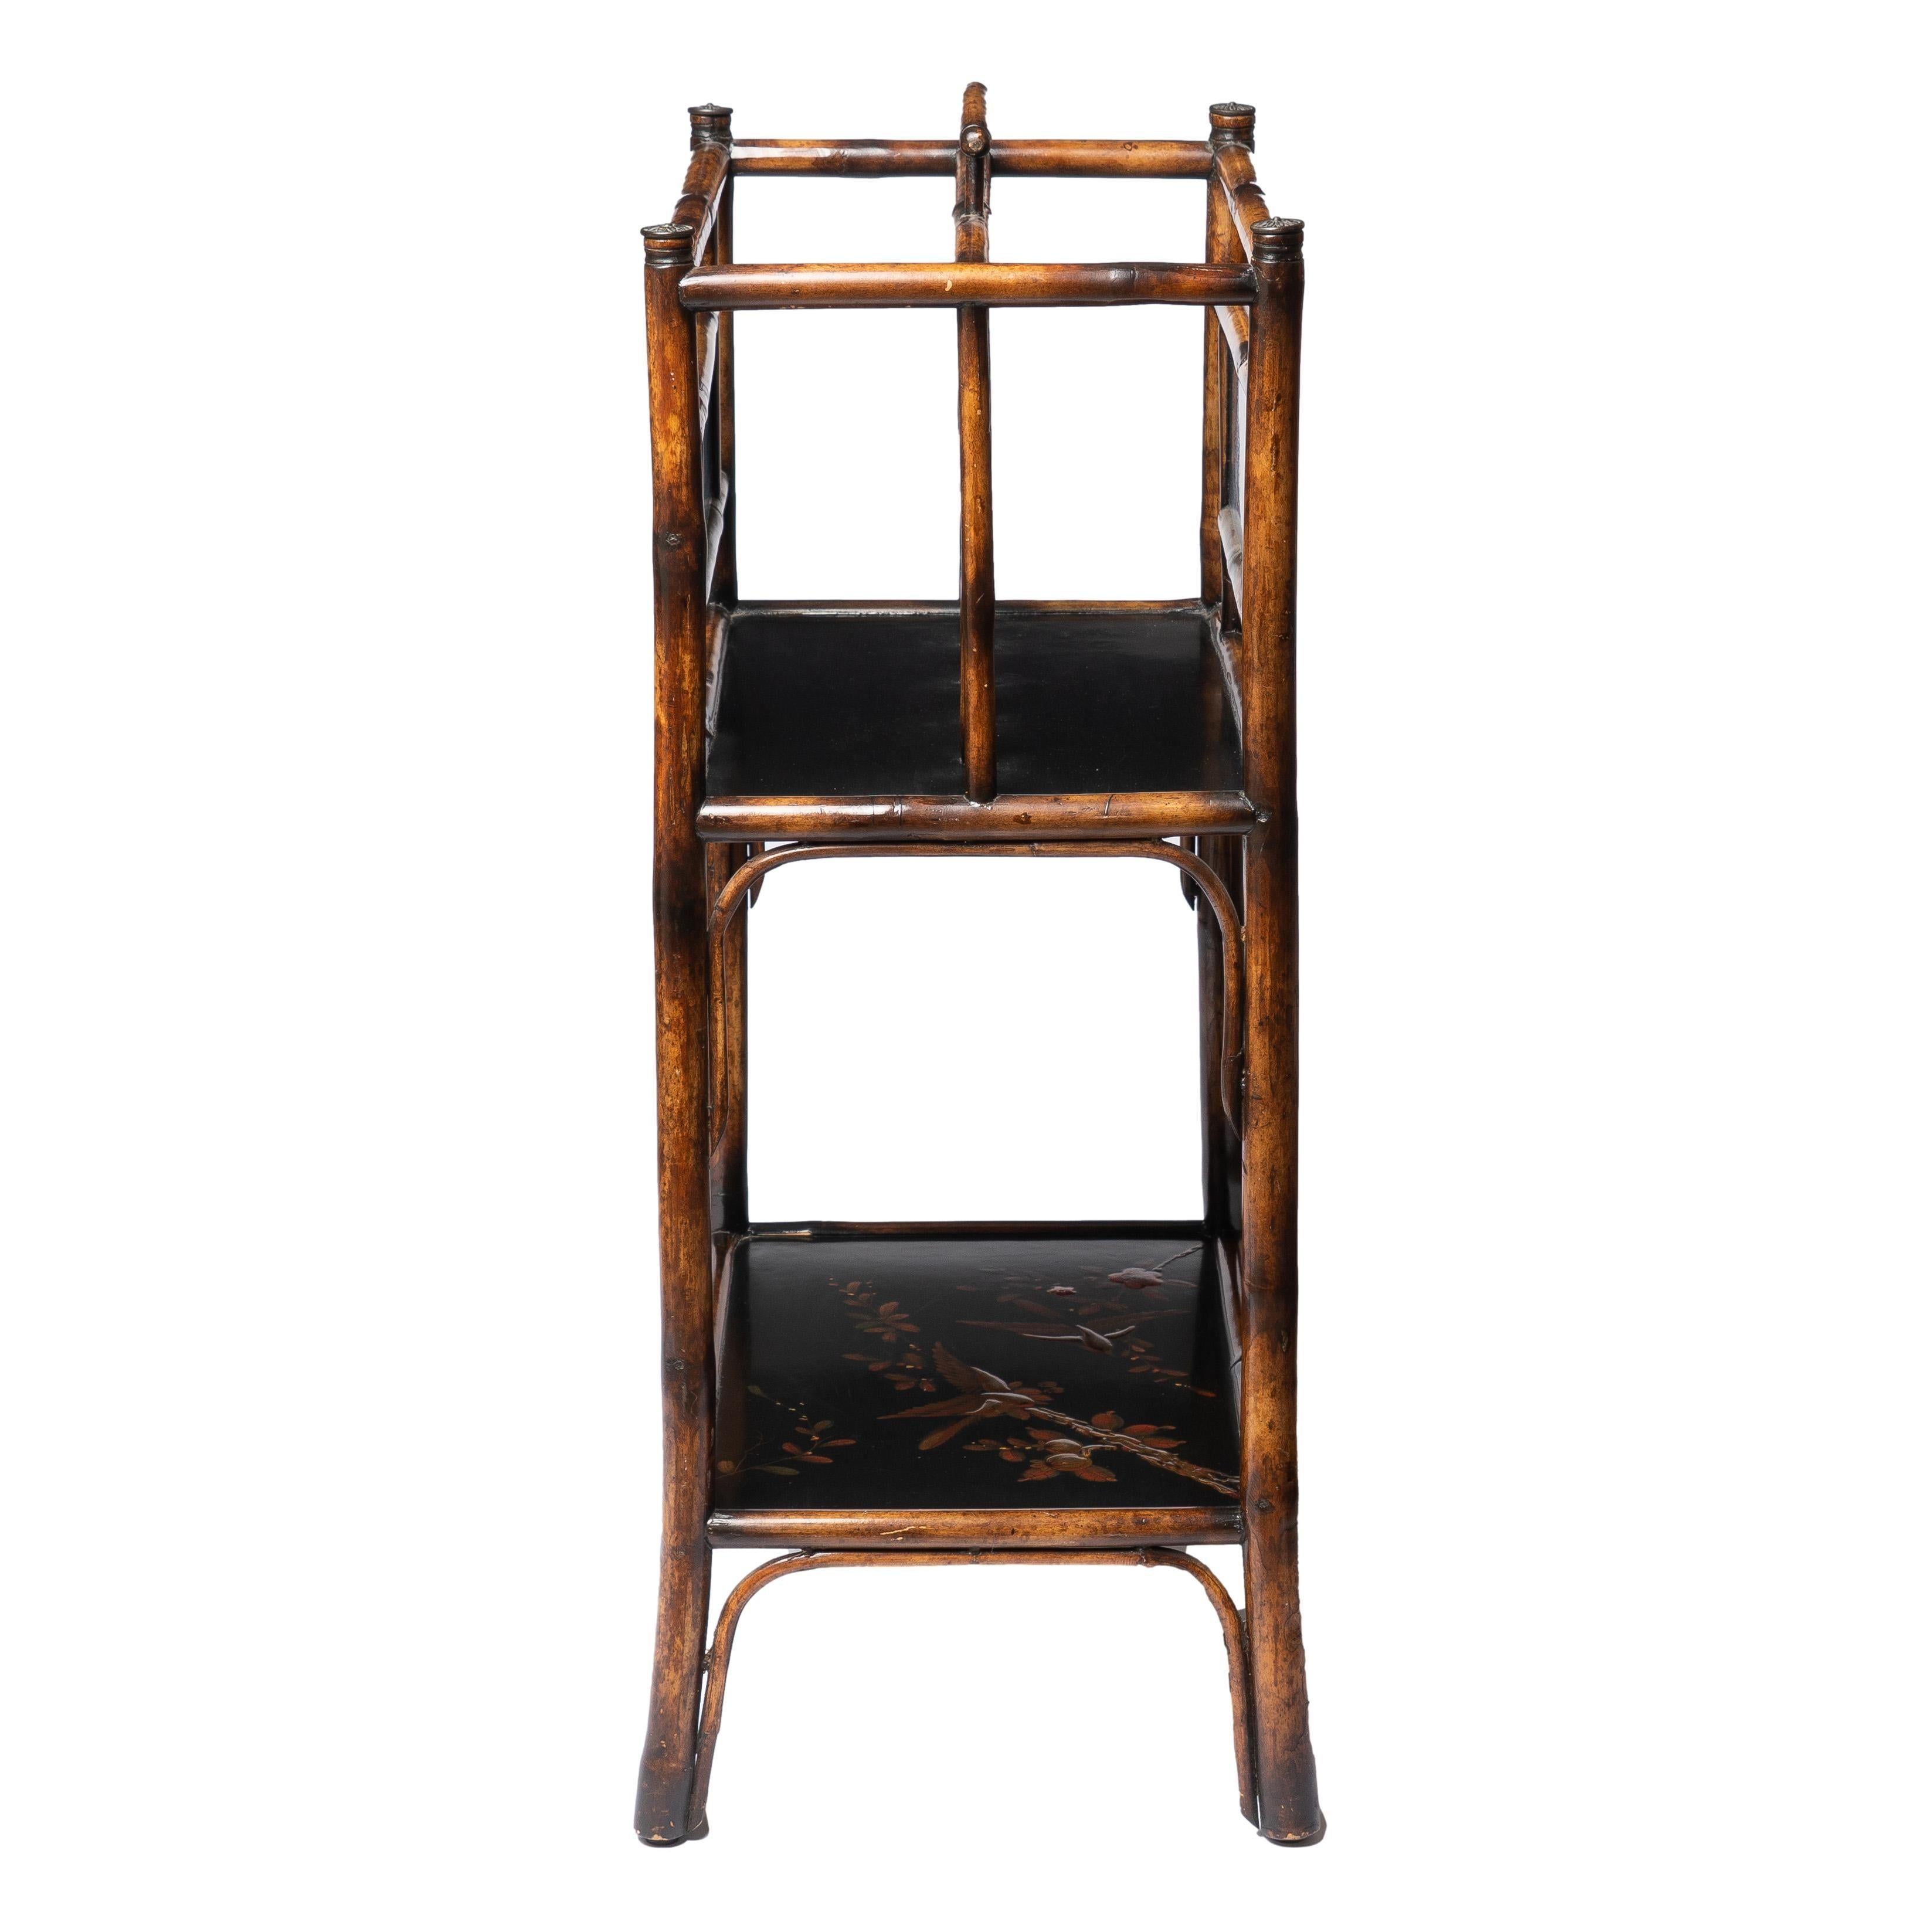 19th Century English Aesthetic Movement Bamboo Book Stand, 1900